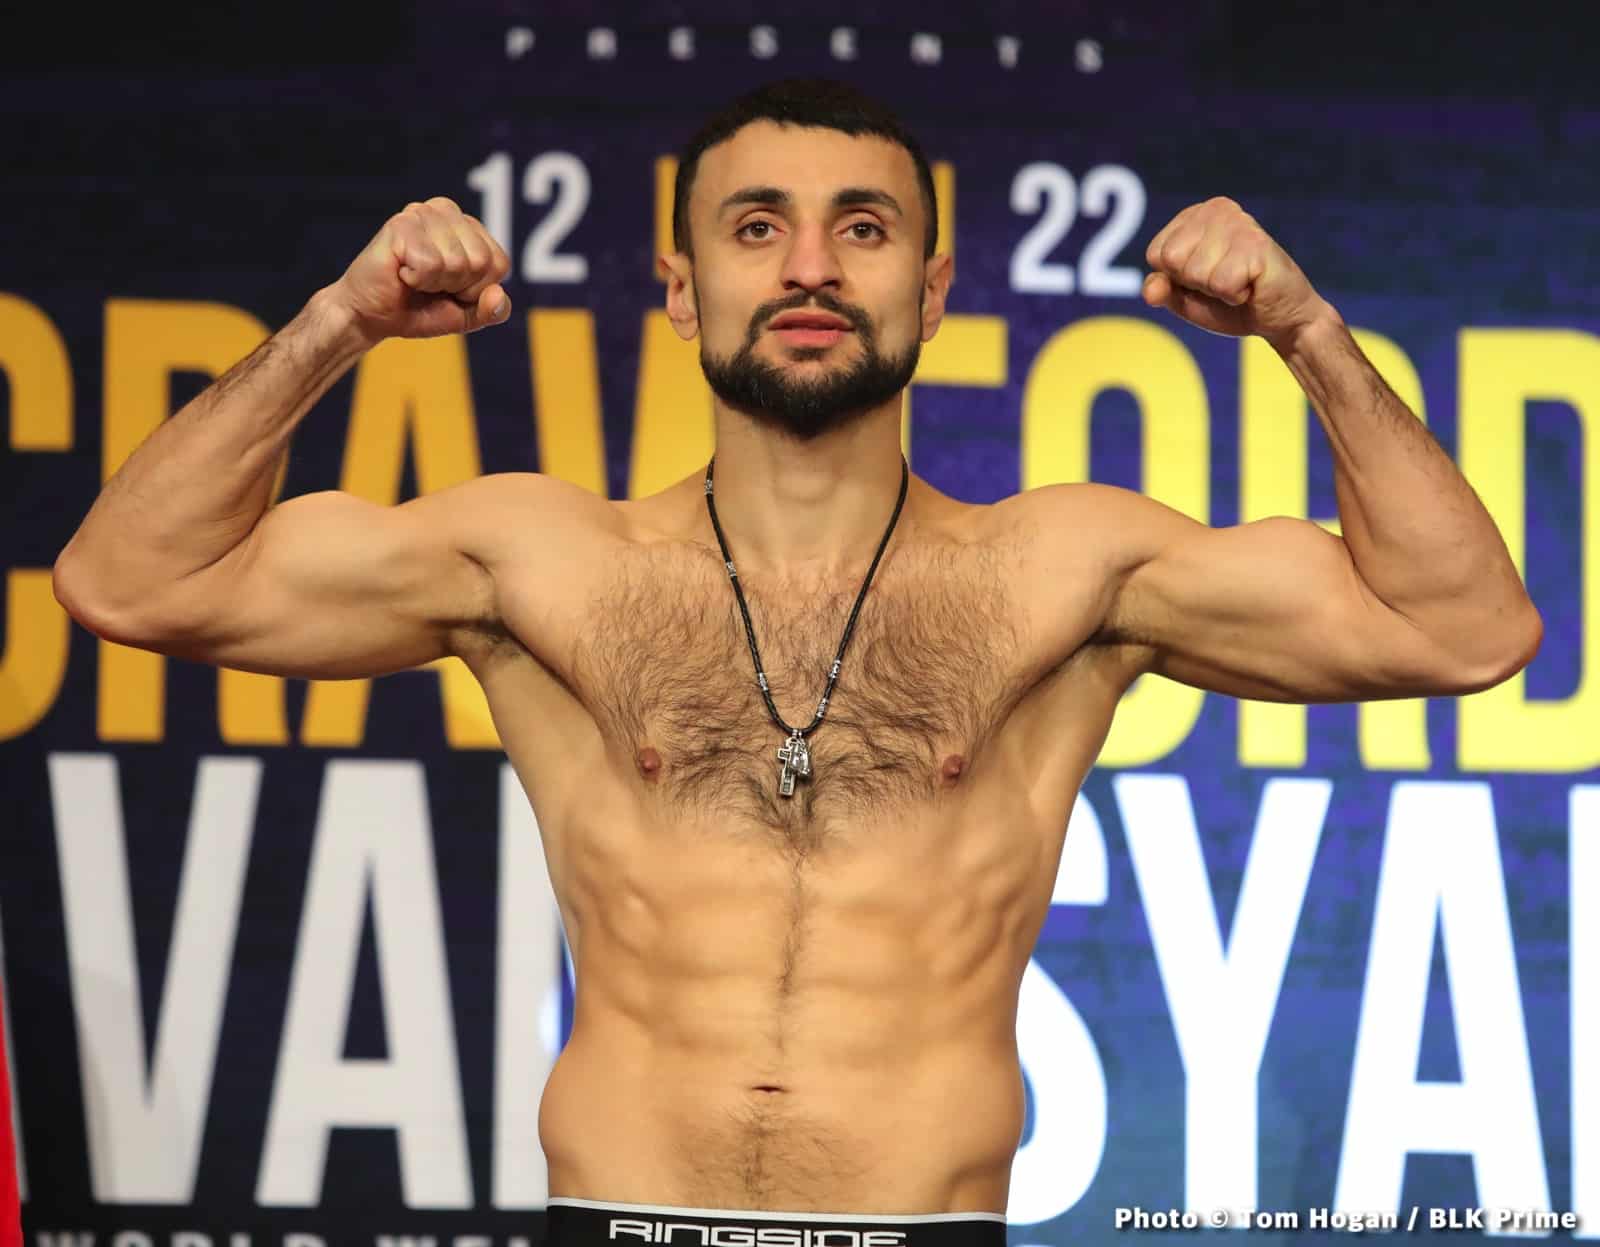 Image: Terence Crawford 146.6 vs. David Avanesyan 146.8 - Weigh-in results